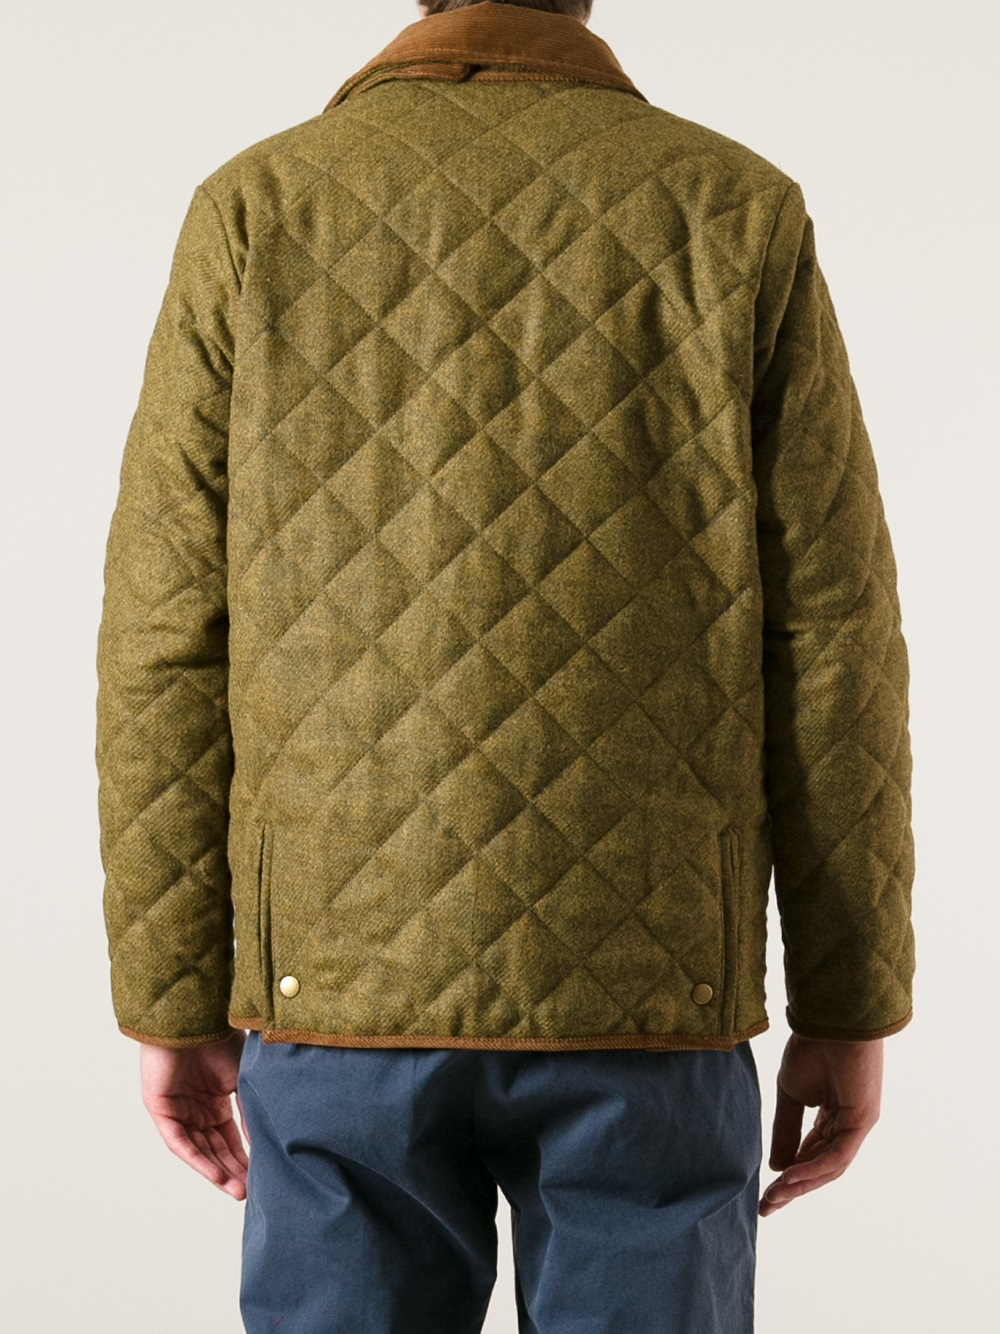 Barbour Quilted Jacket in Brown (Natural) for Men - Lyst